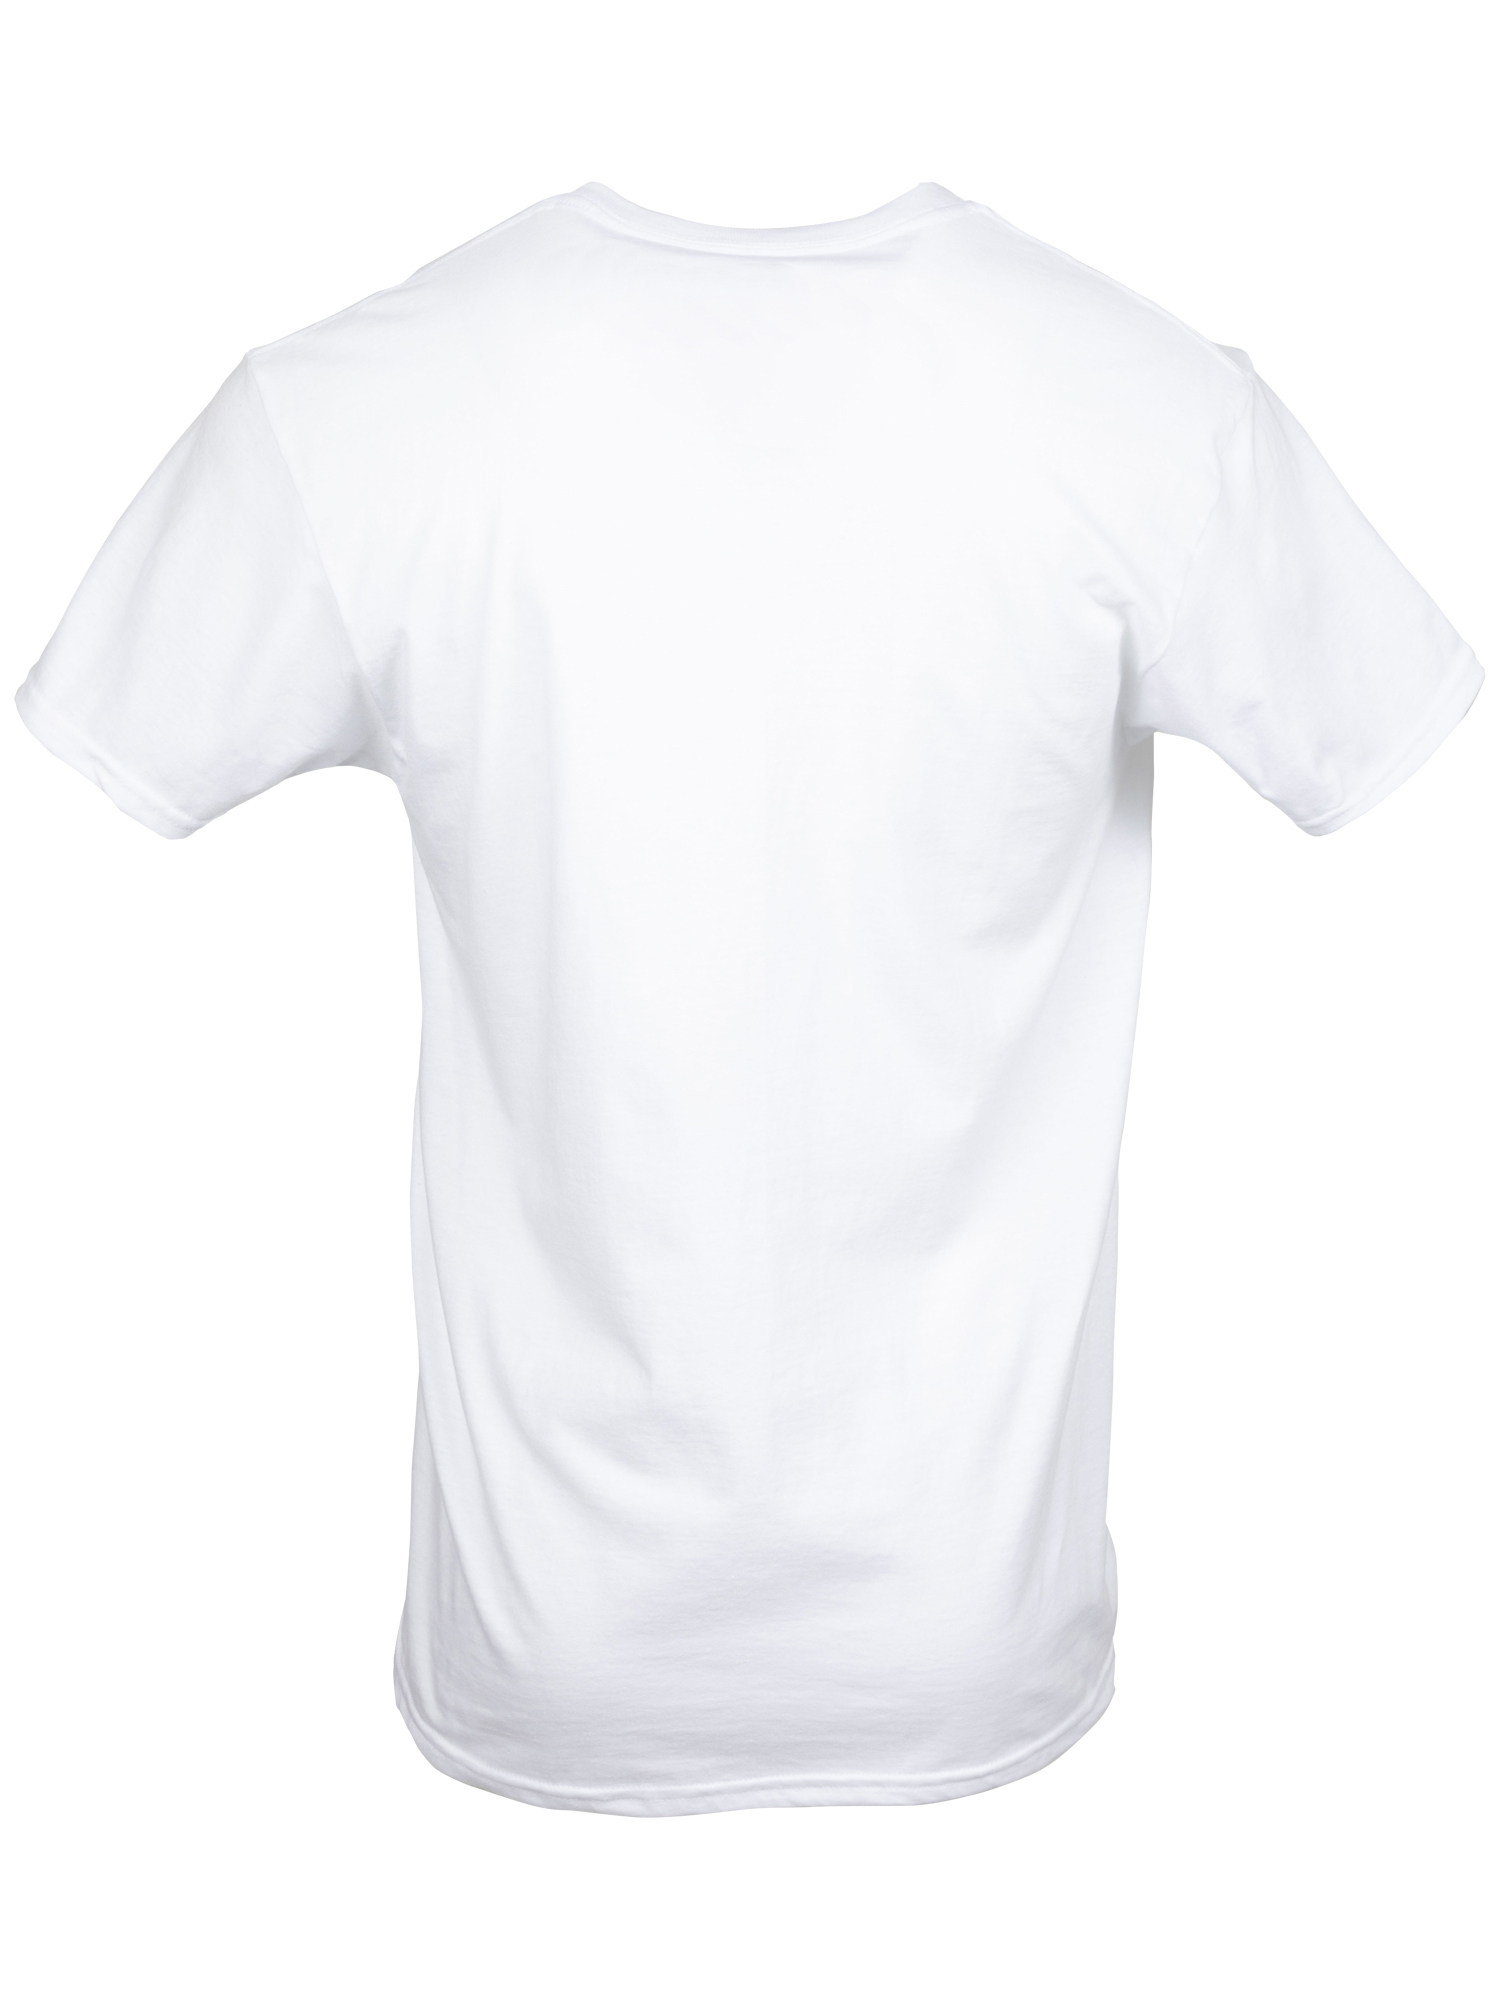 George Men's Crew T-Shirts, 6-Pack - image 5 of 7